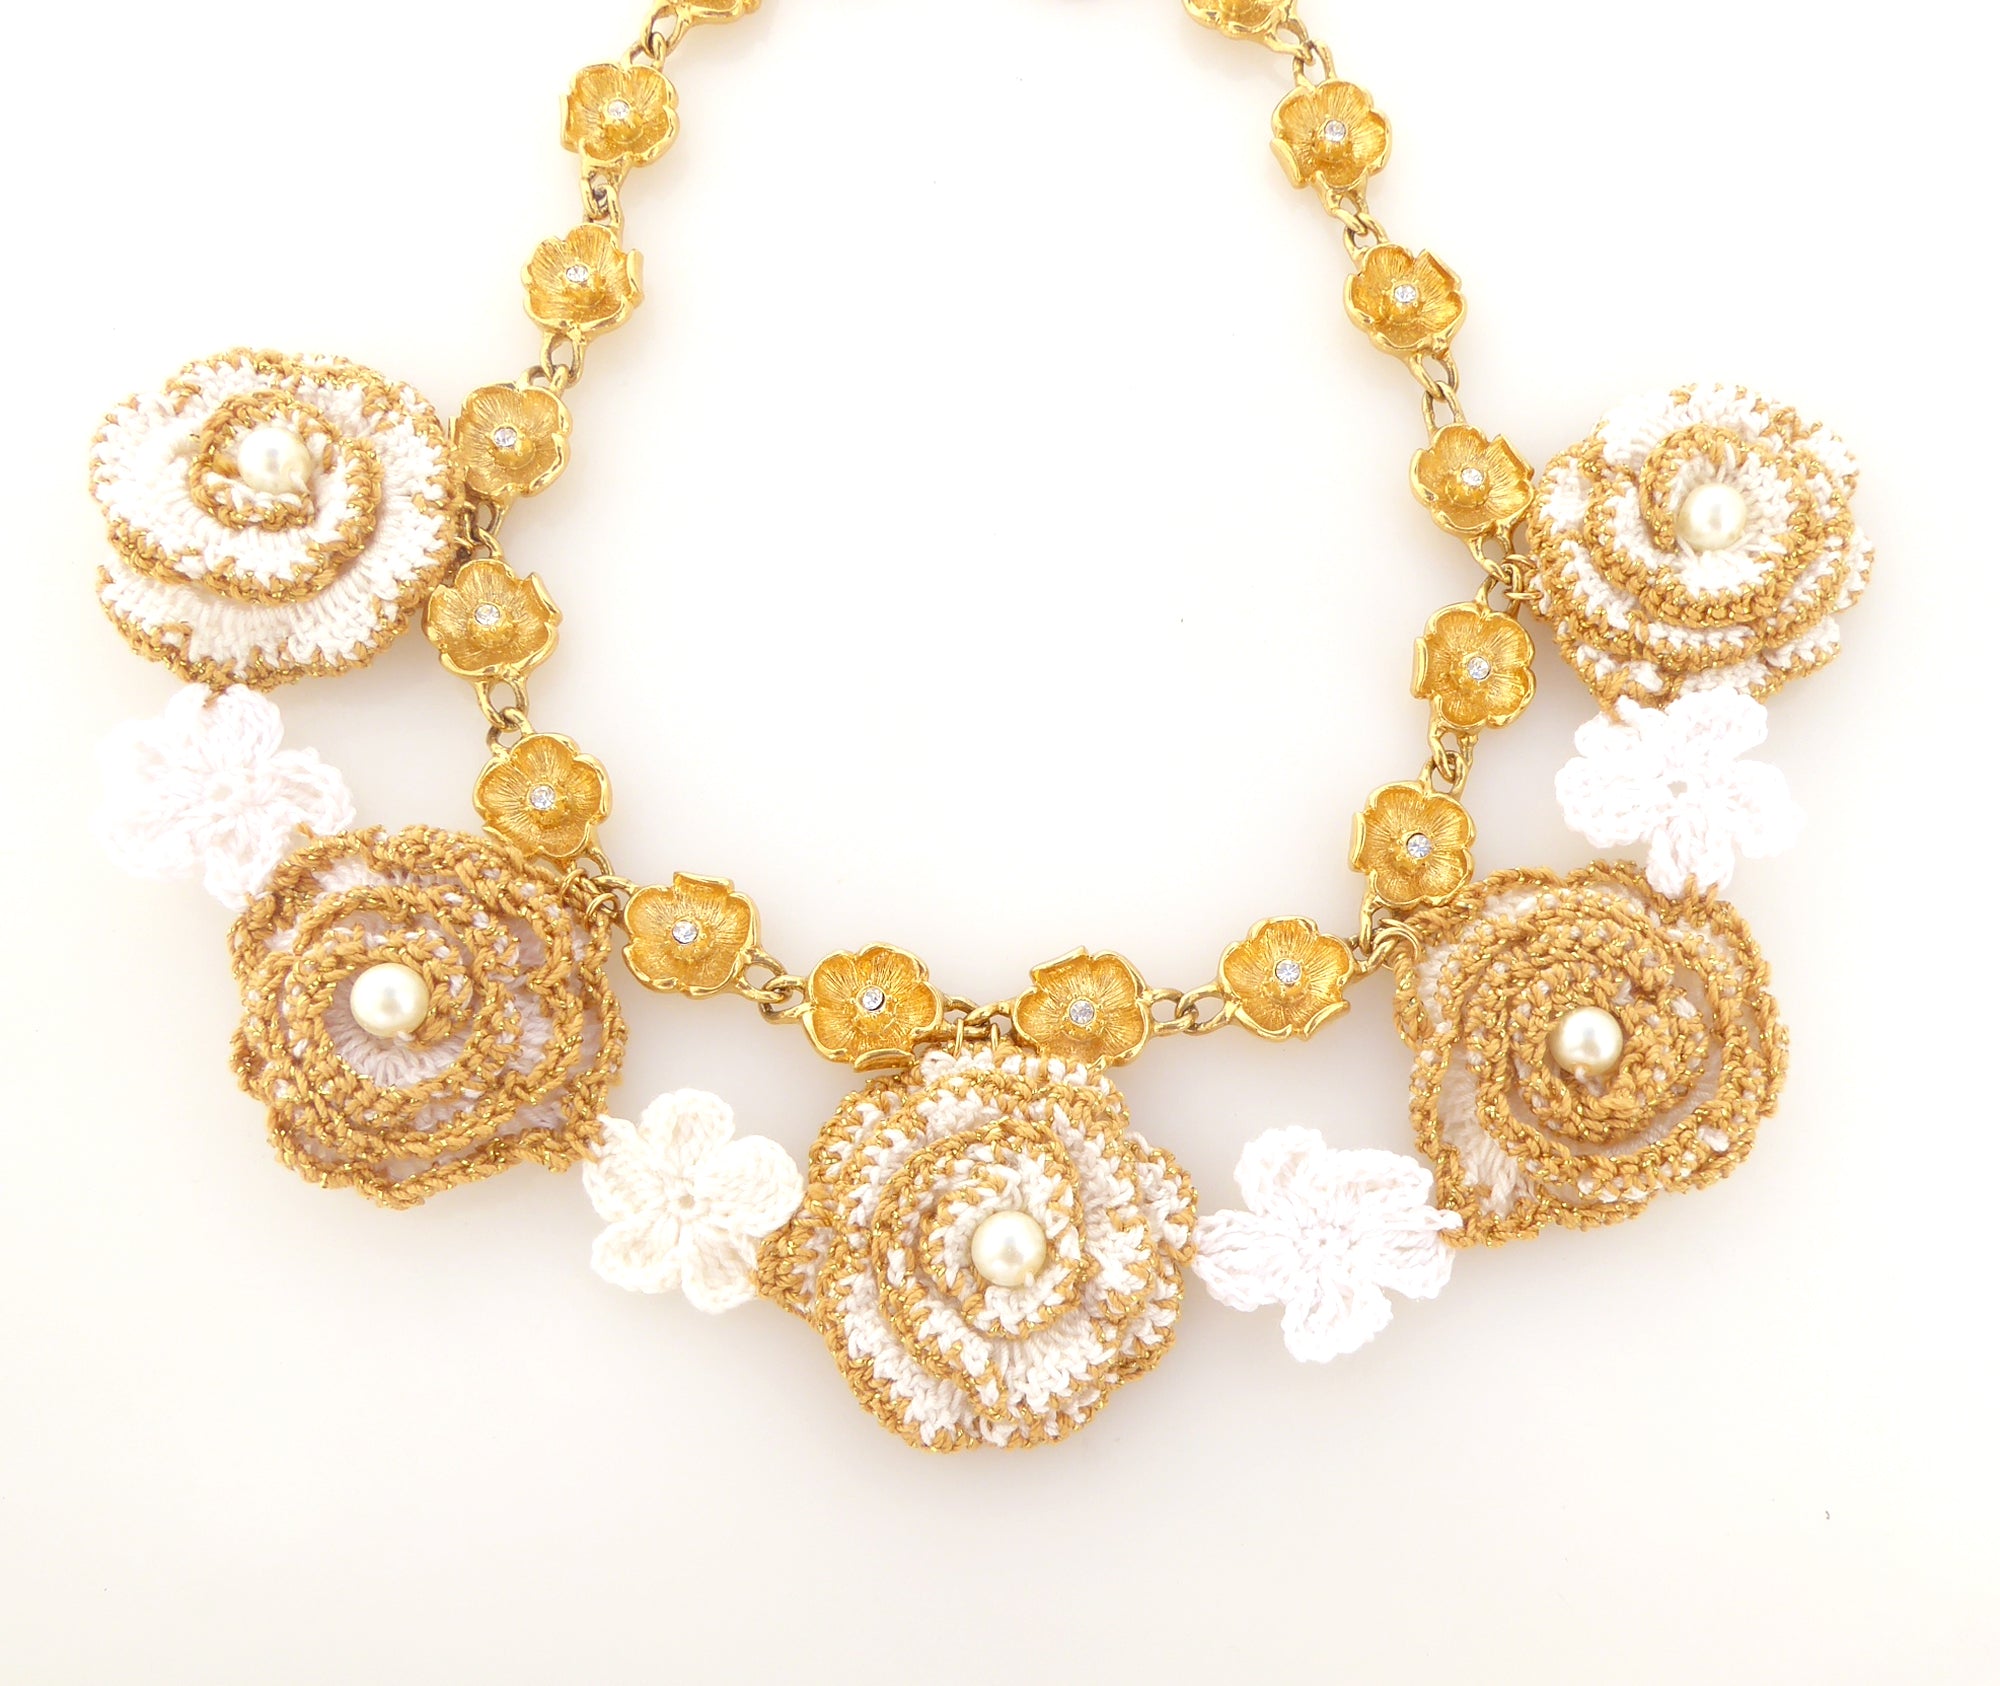 Gold and white crochet flower necklace by Jenny Dayco 4